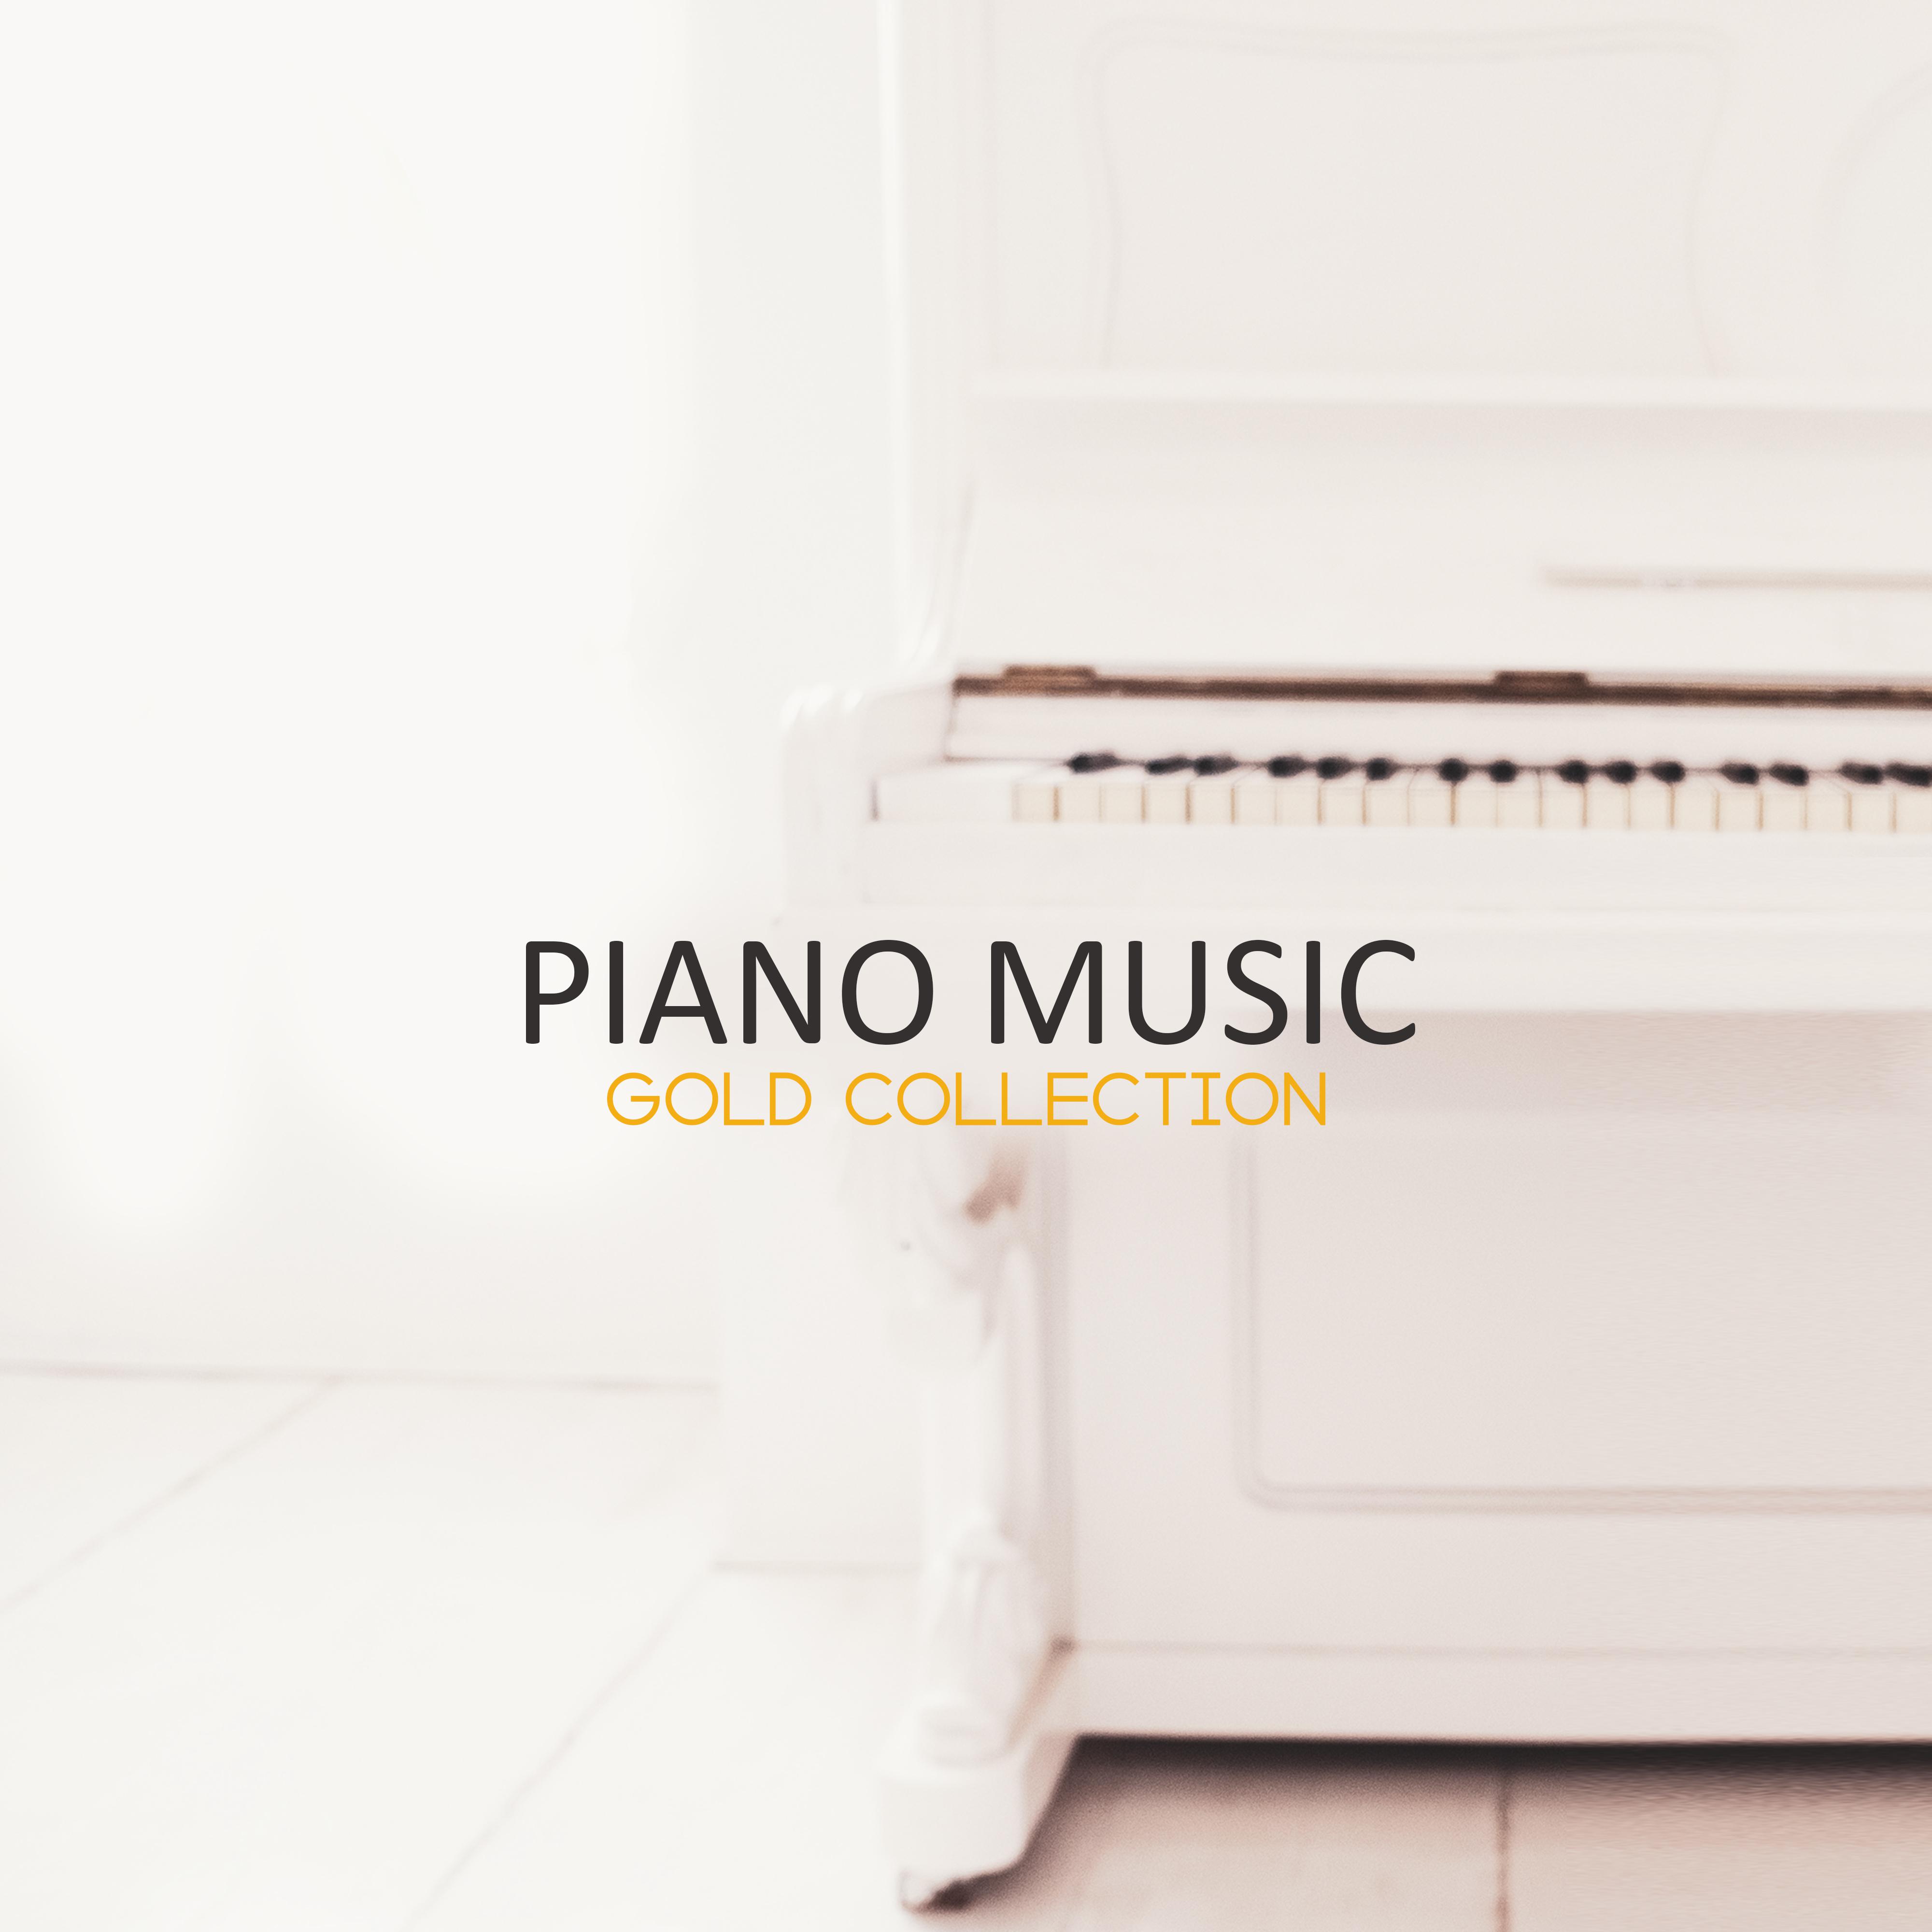 Piano Music Gold Collection – 2019 Most Beautiful Piano Melodies for Many Occasions, Soft Background for Restaurant or Cafe, Relaxation After Tough Day, Calming Down, Romantic Evening with Love